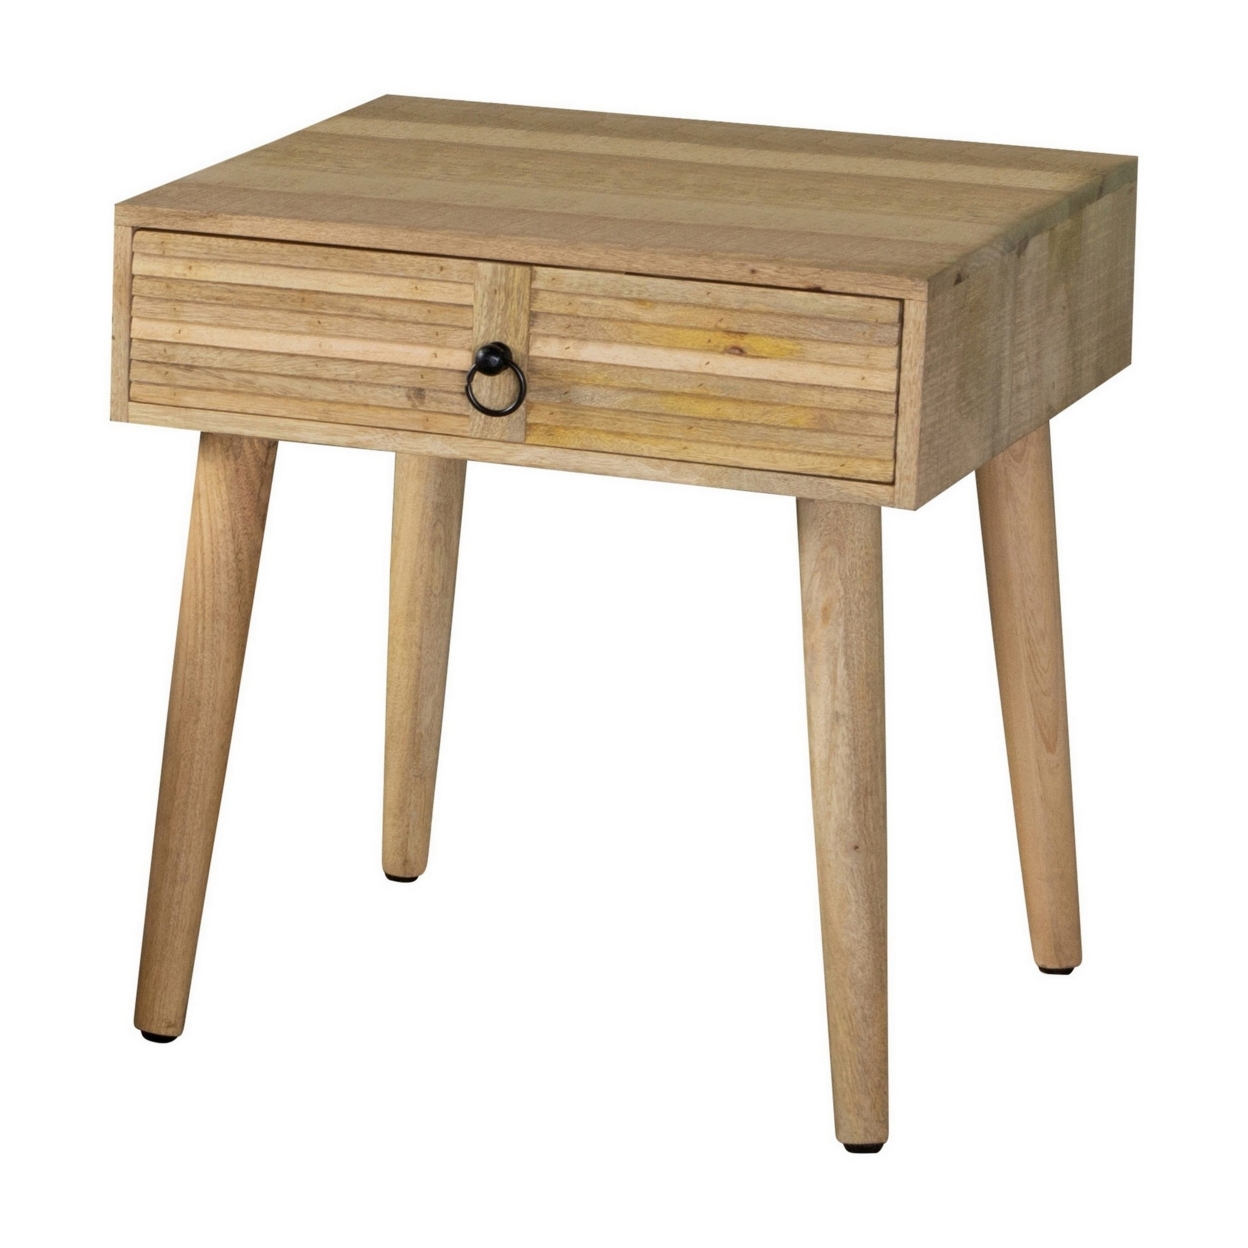 24 Inch Square End Table, Natural Brown Mango Wood, Ribbed Plank Design